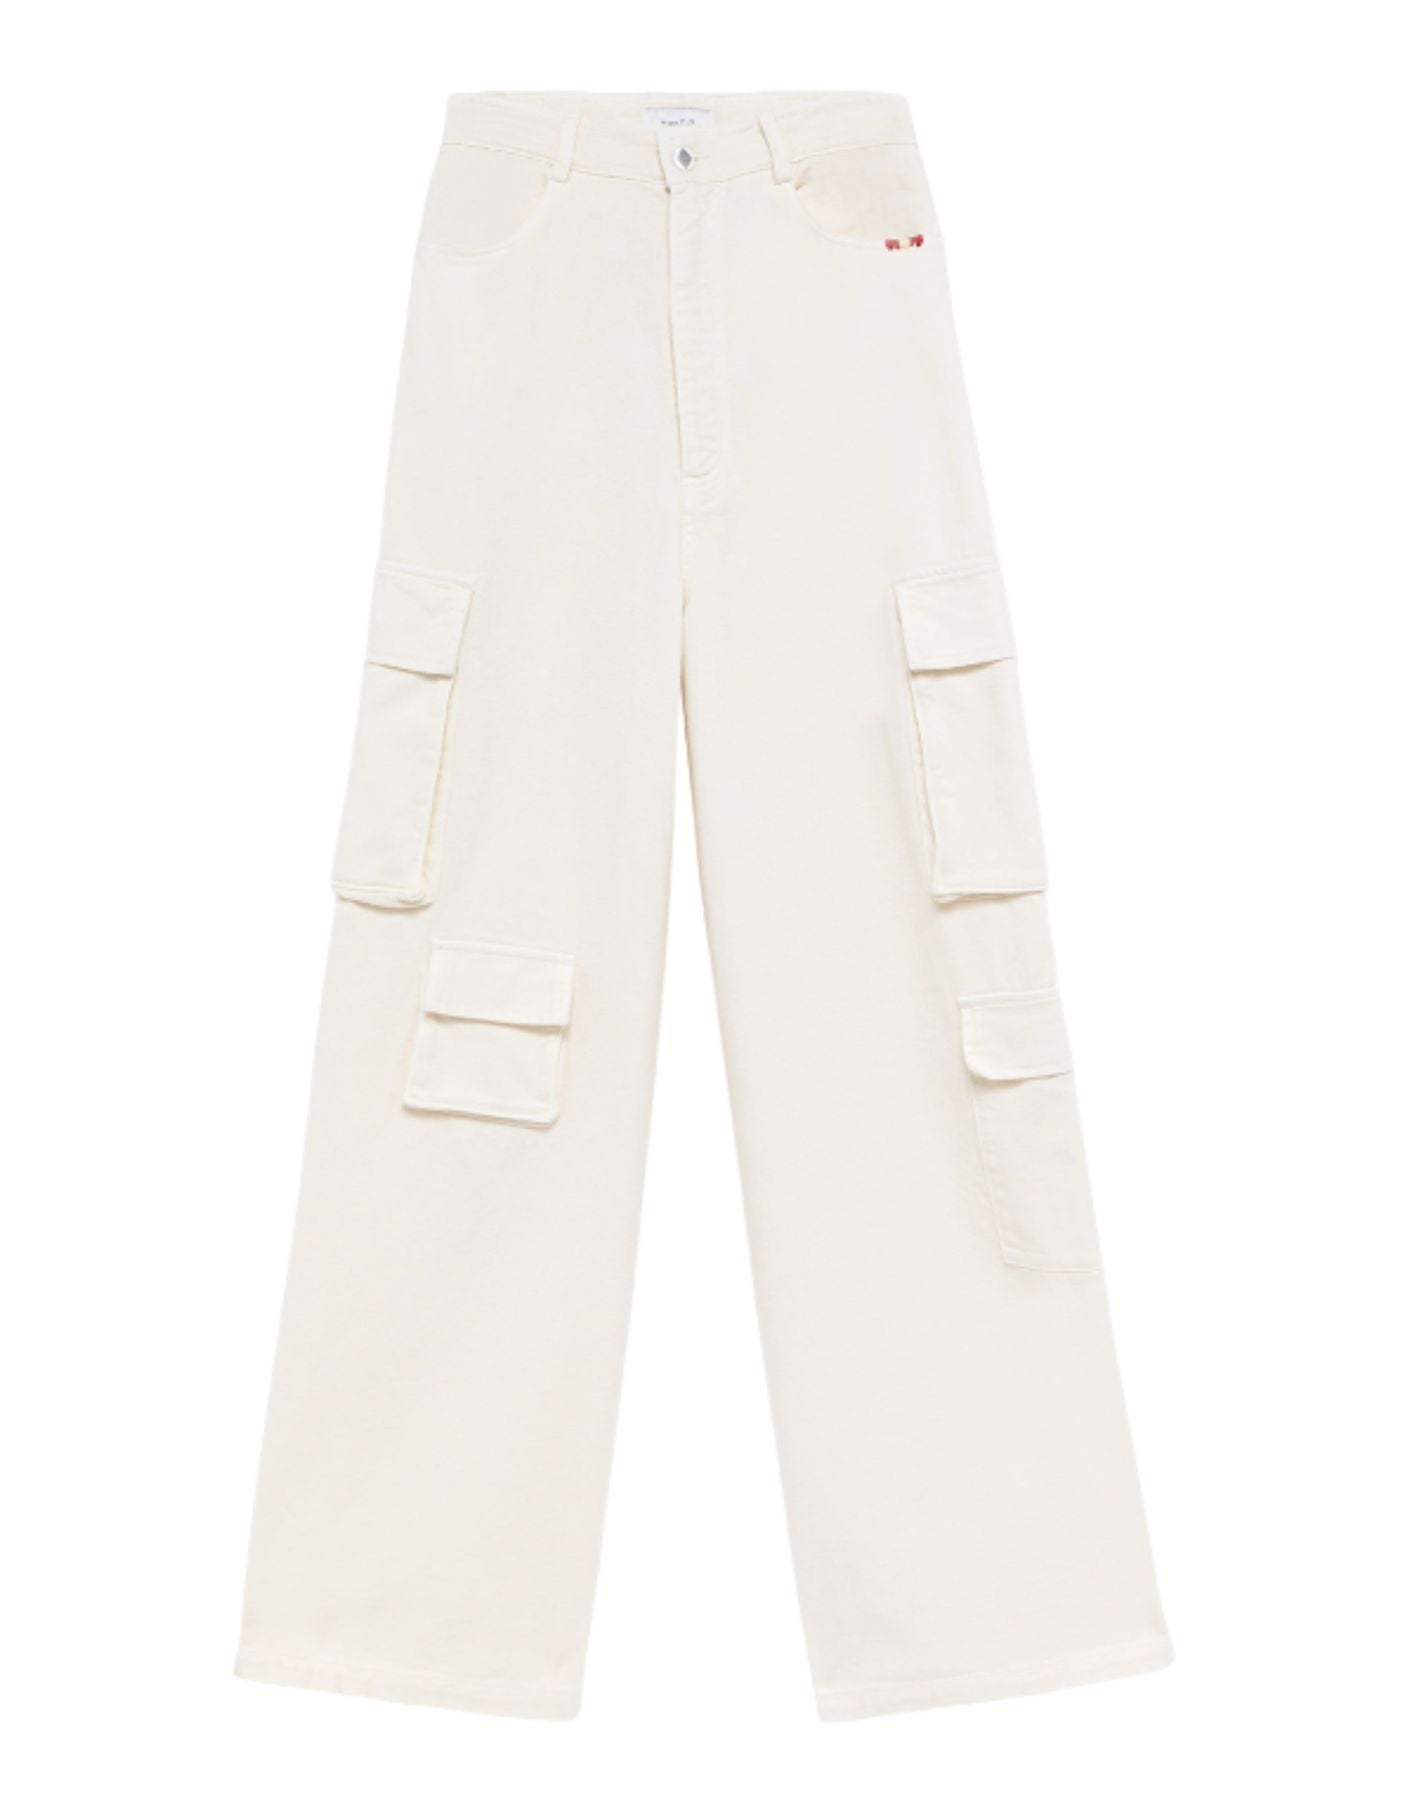 Jeans Woman AMD065P3200111 White Amish